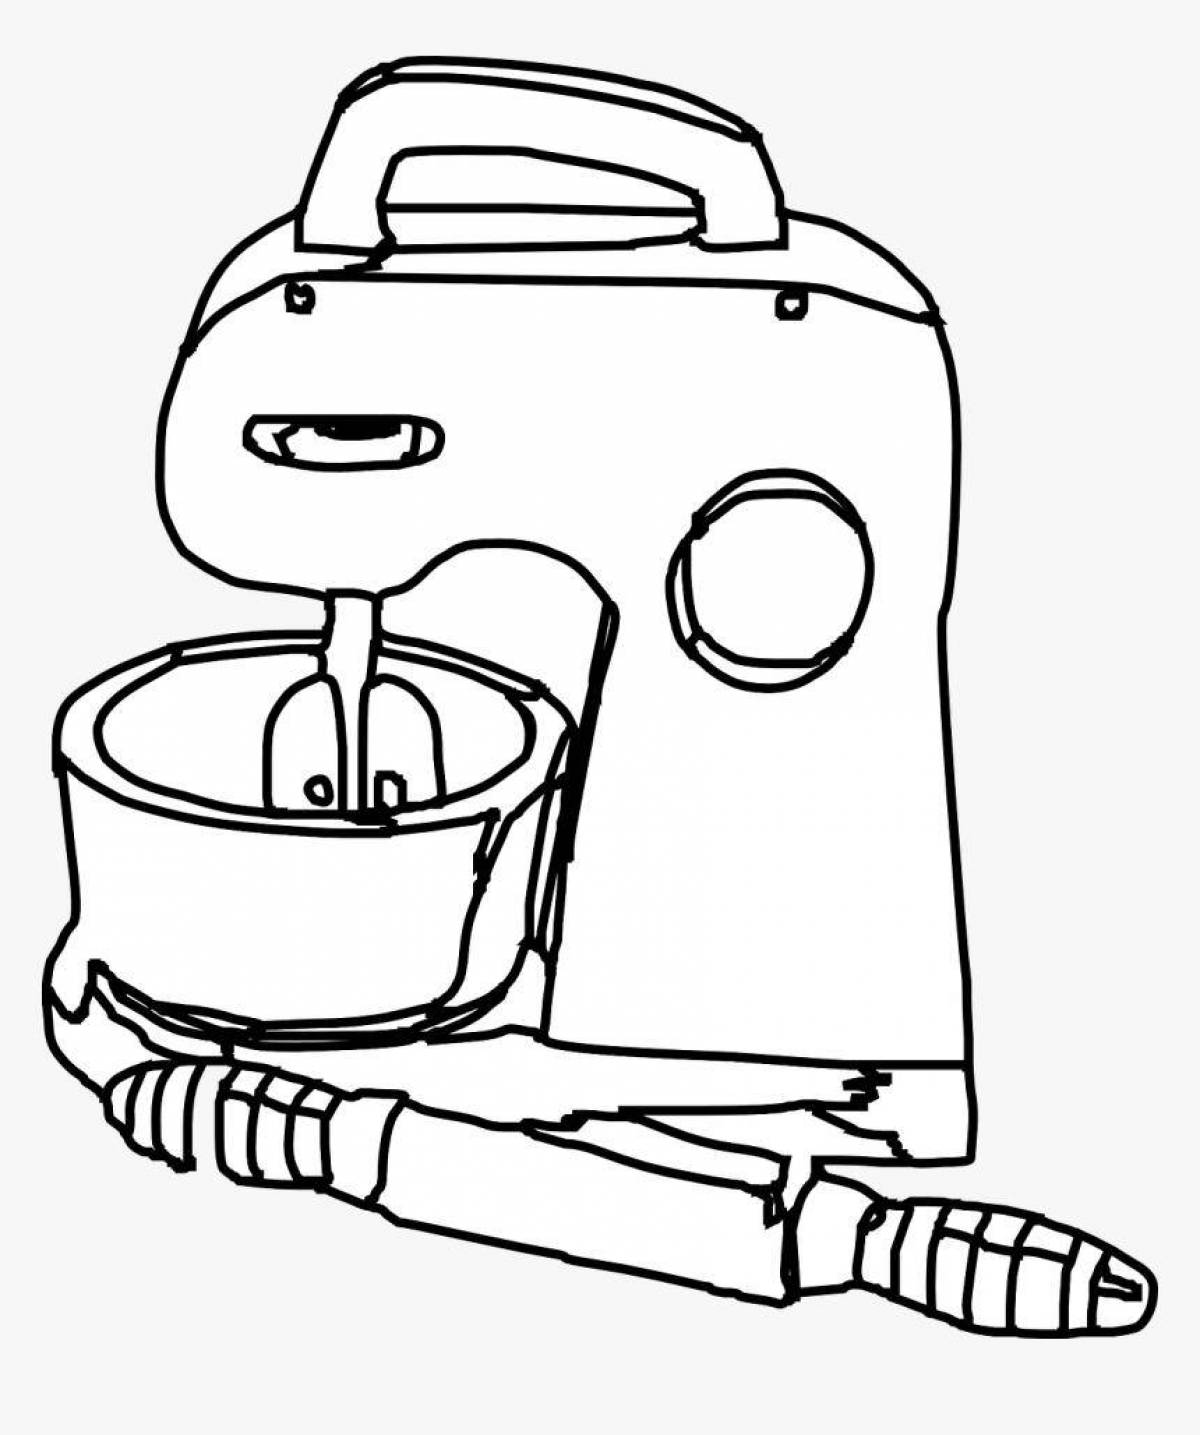 Playful coloring of electrical appliances for children